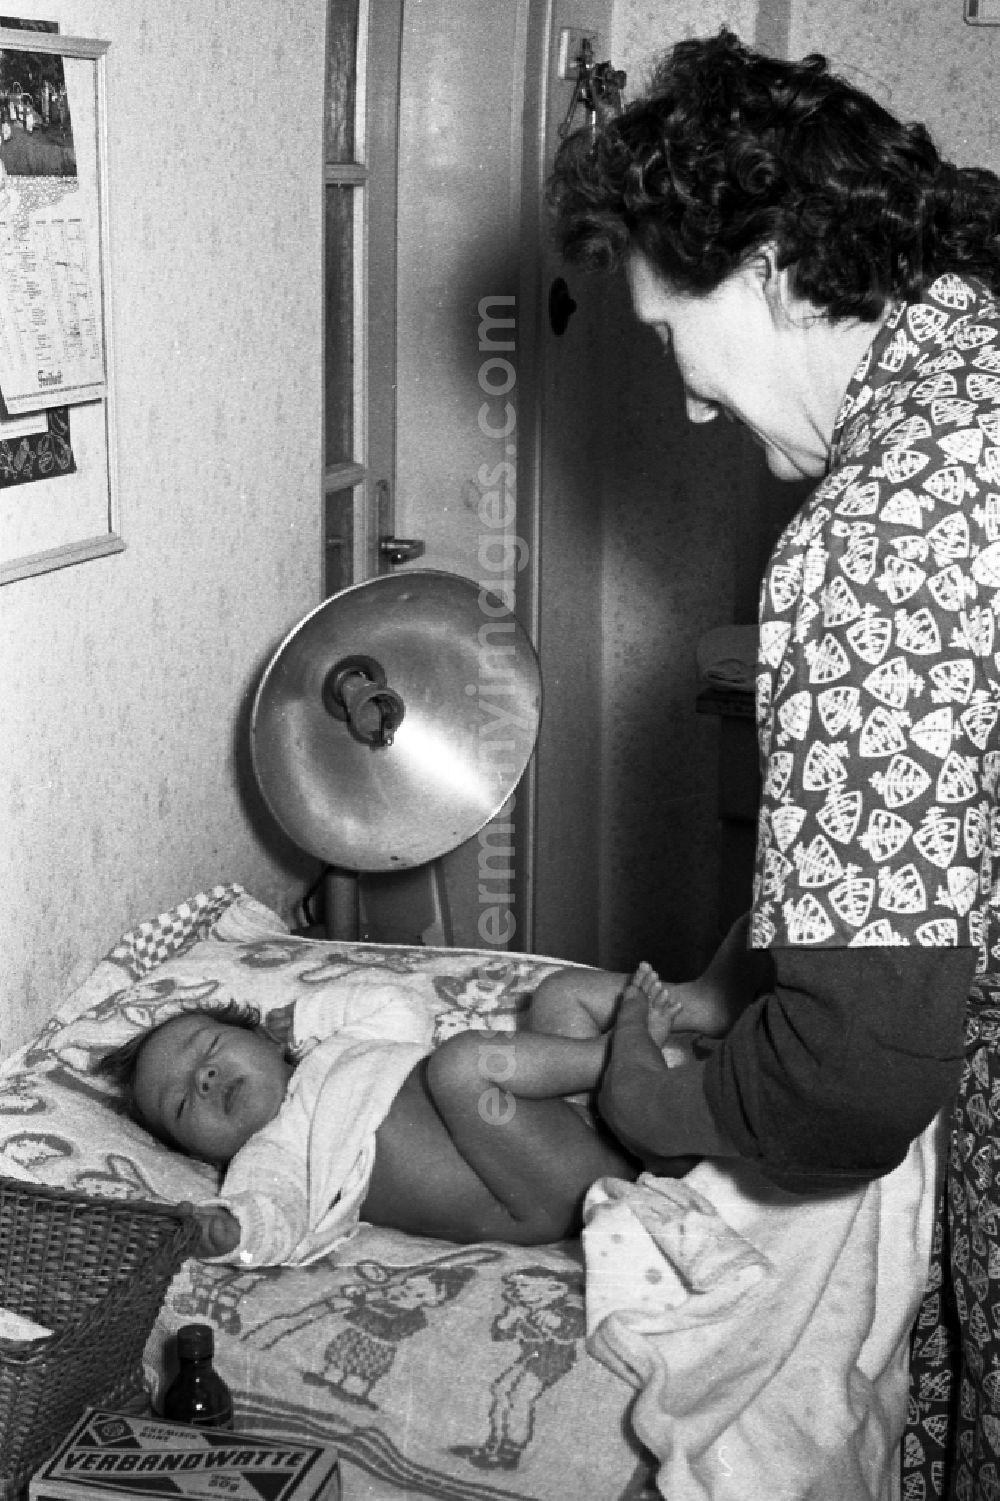 GDR photo archive: Merseburg - A mother wraps her baby in Merseburg in the federal state Saxony-Anhalt in the area of the former GDR, German democratic republic